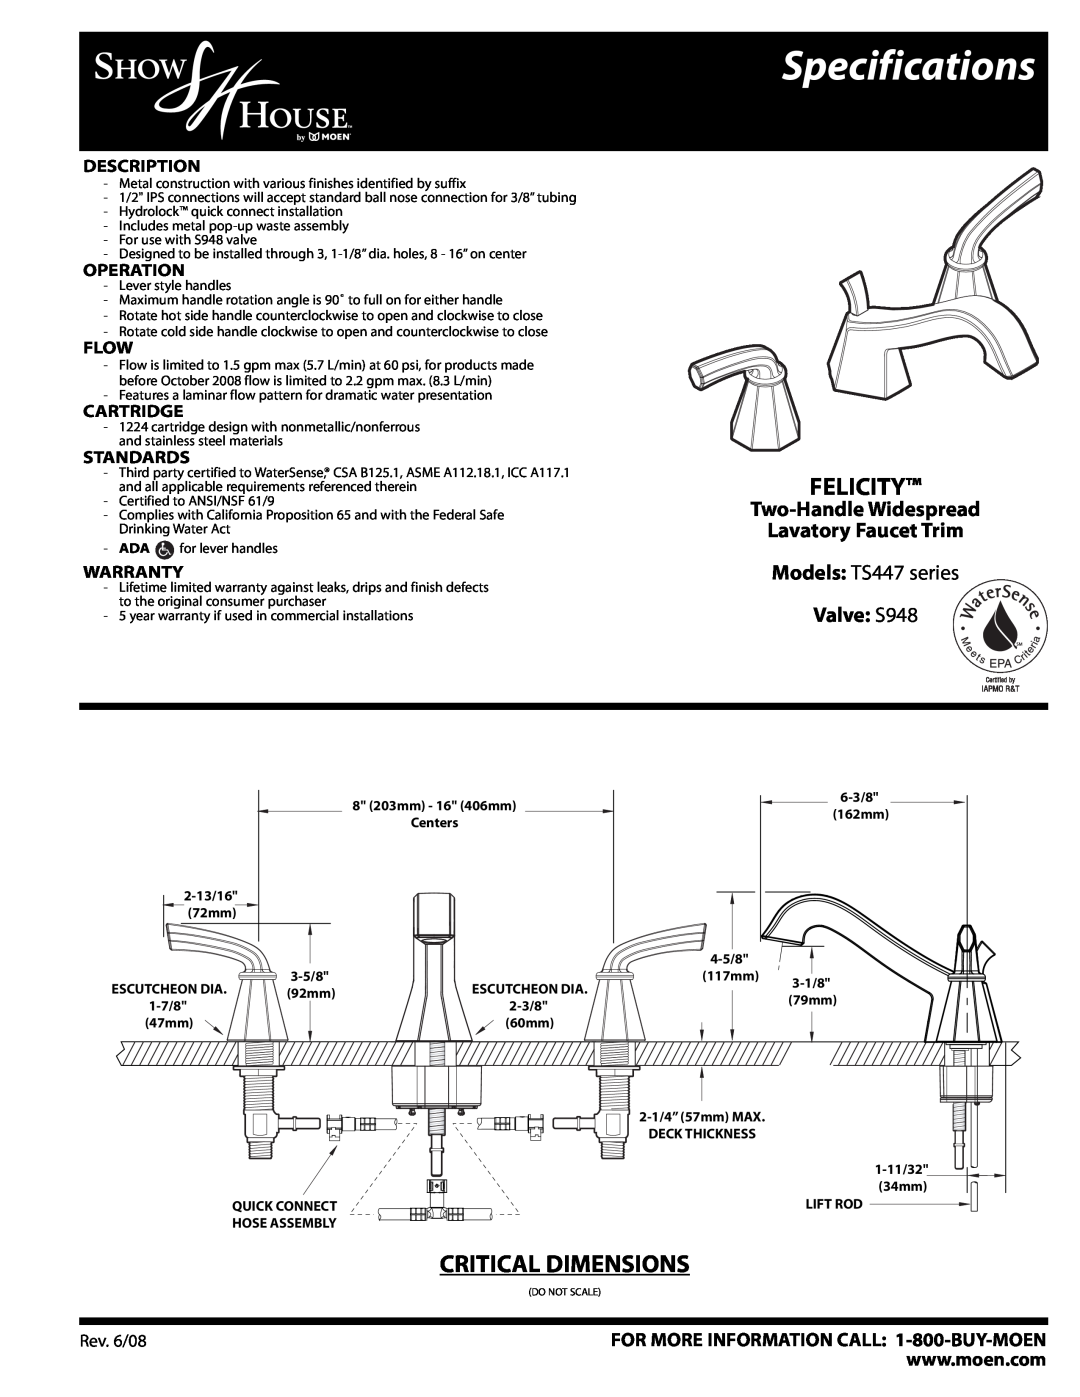 Moen TS447 series specifications Specifications, Felicity, Critical Dimensions, Two-Handle Widespread Lavatory Faucet Trim 